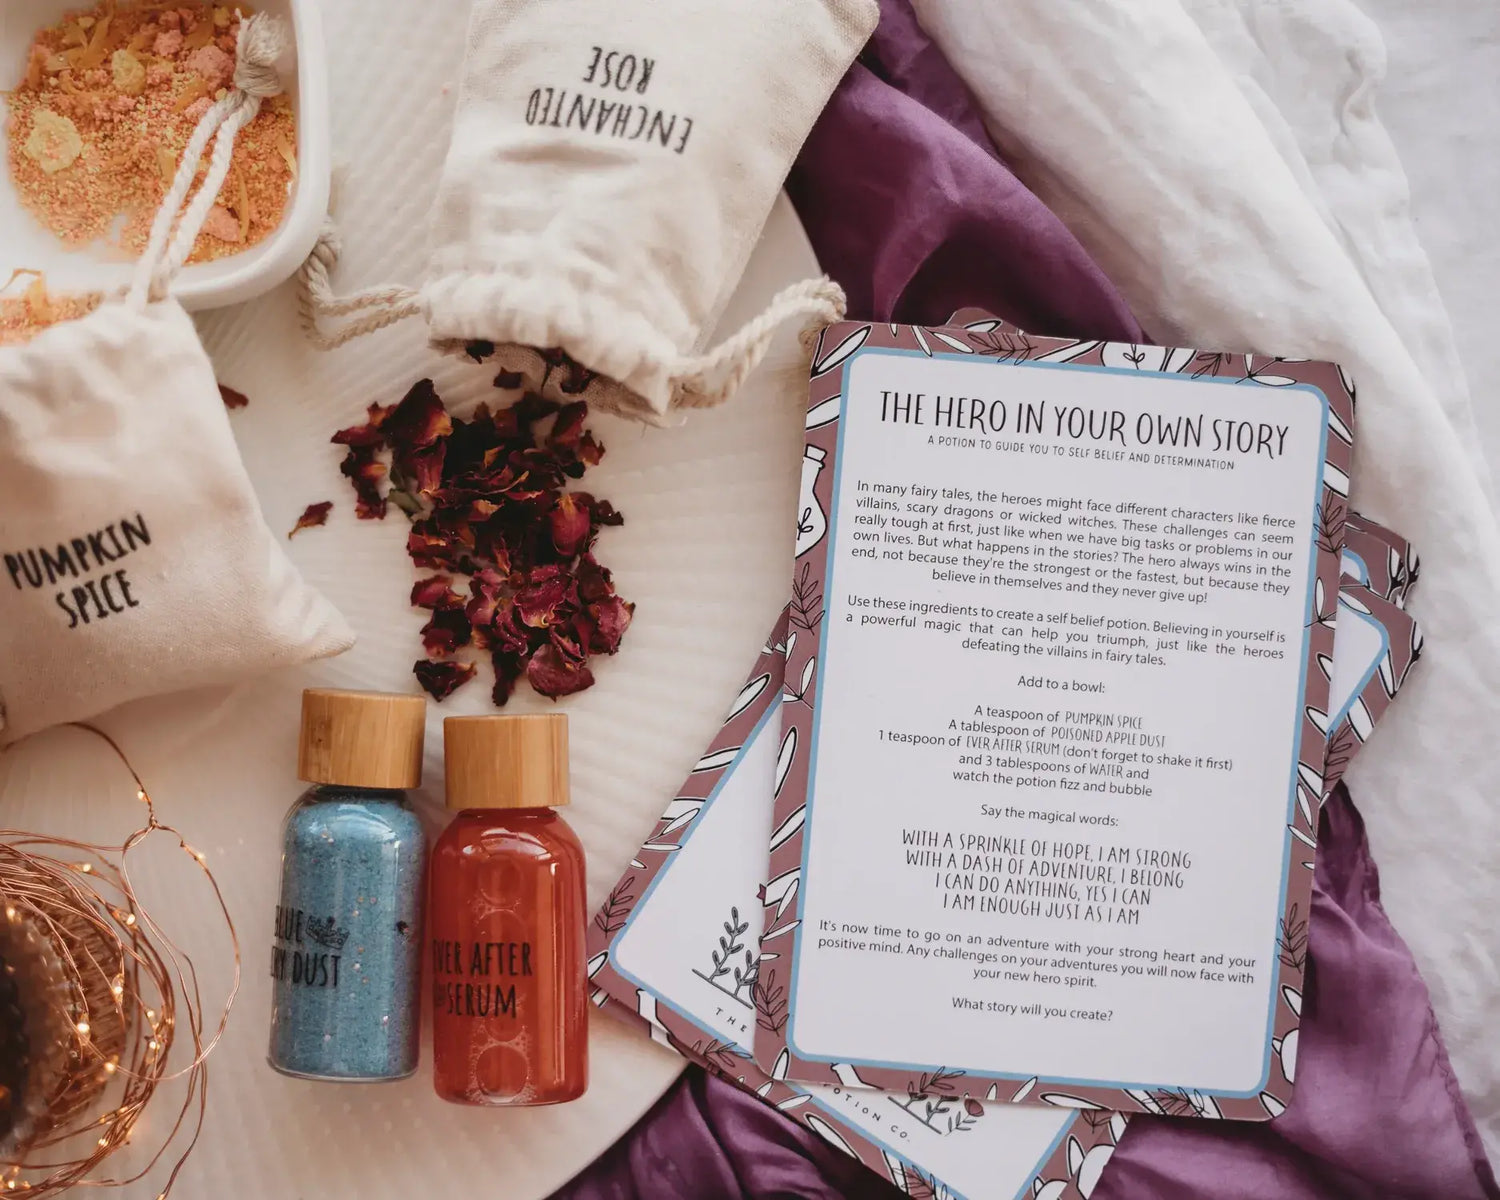 Once Upon a Potion - Playful Potion Kit by The Little Potion Co